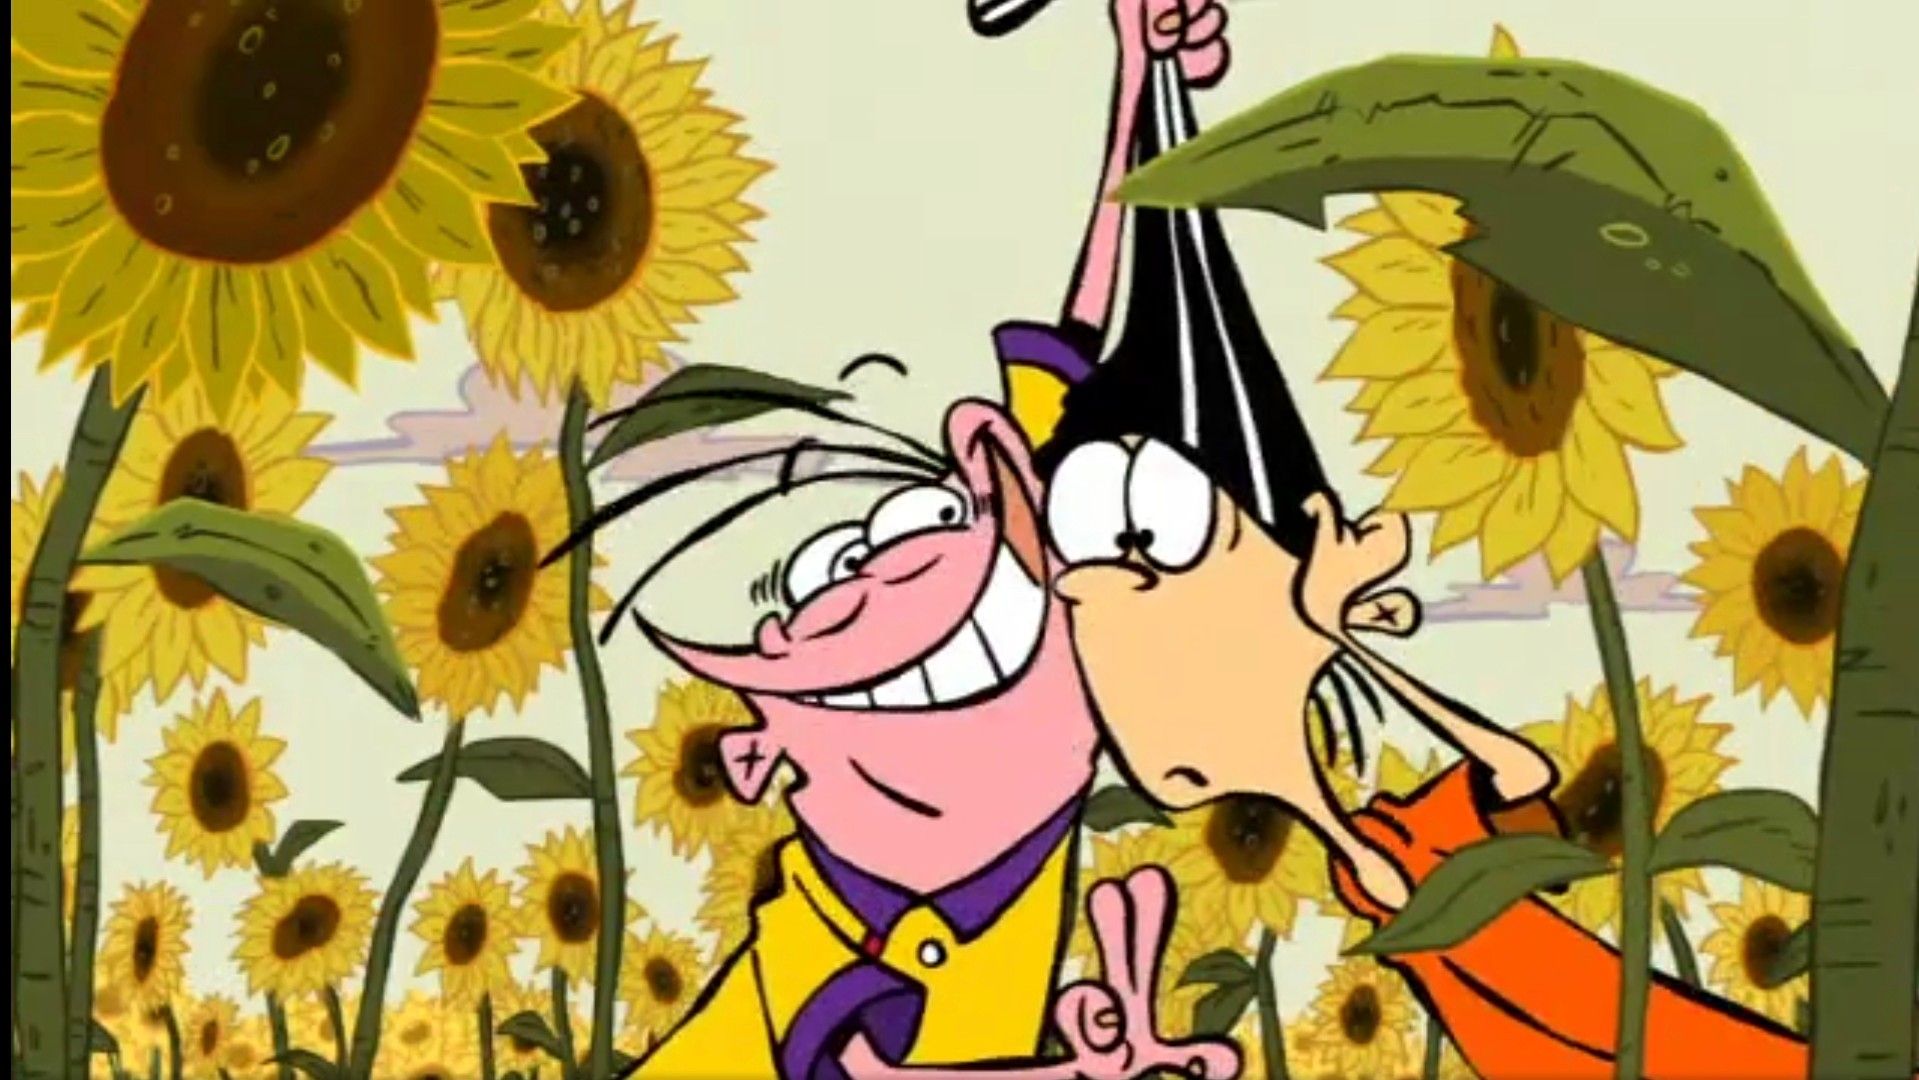 Double d and Eddy